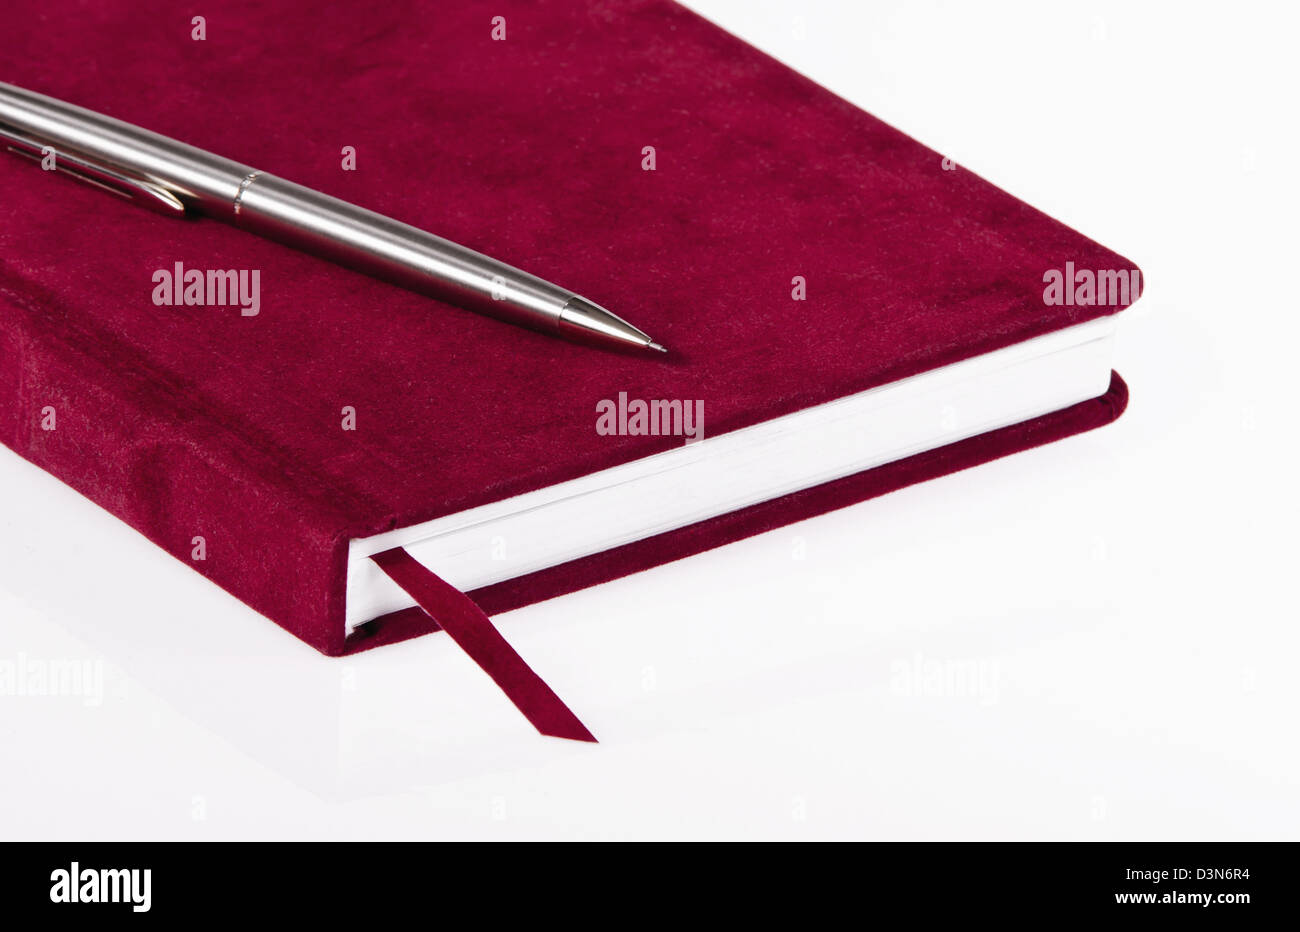 Red journal and a pen over white background Stock Photo